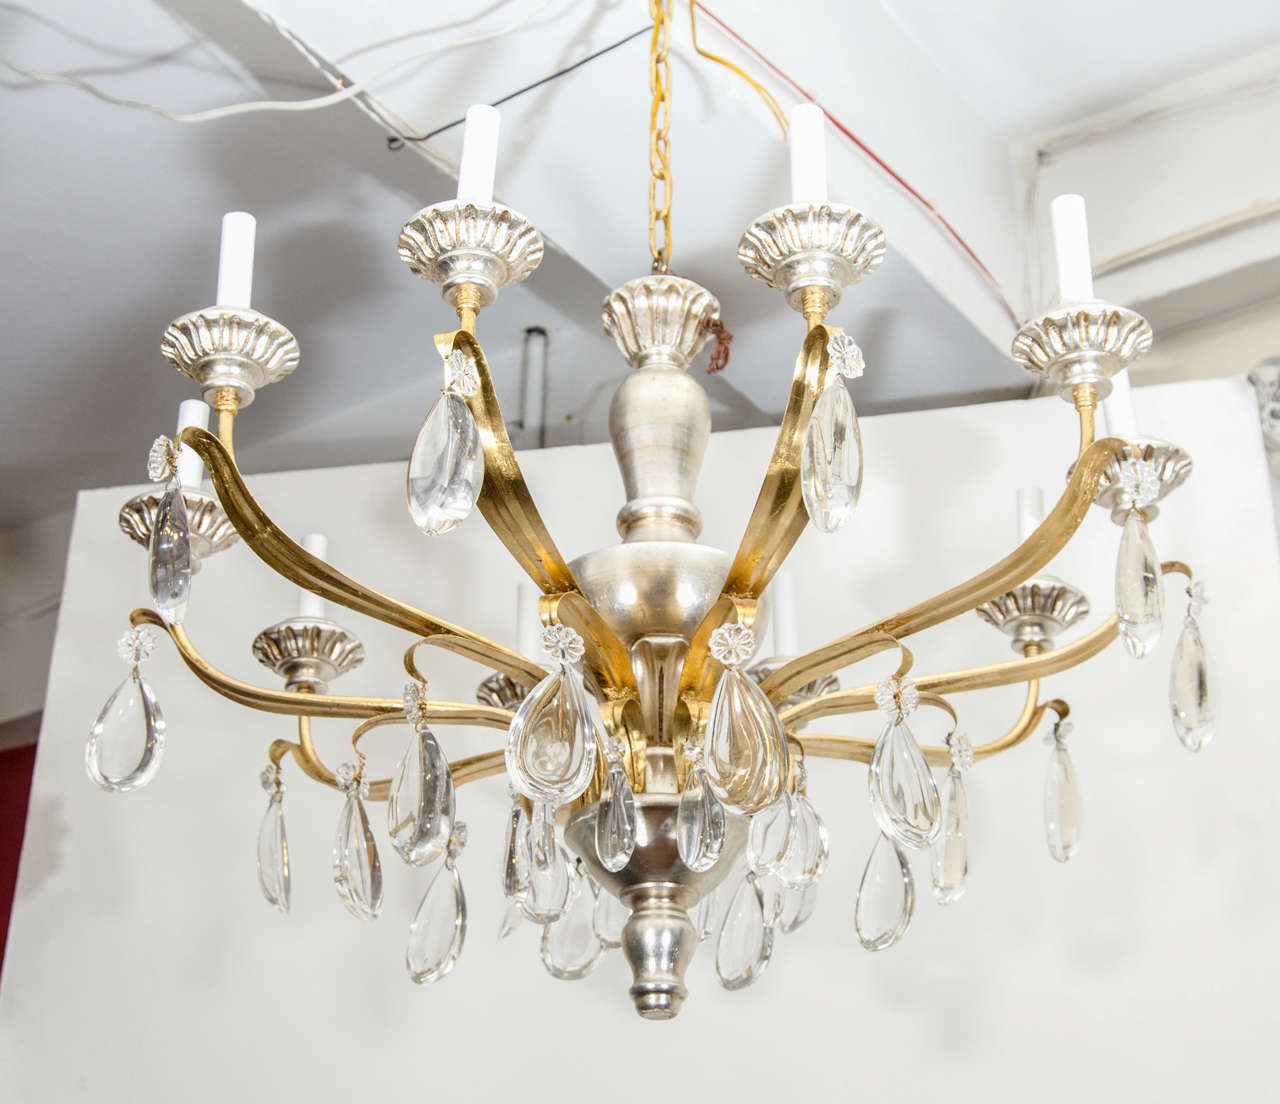 A vintage 10-light chandelier in silvered and gilt wood with suspended crystals